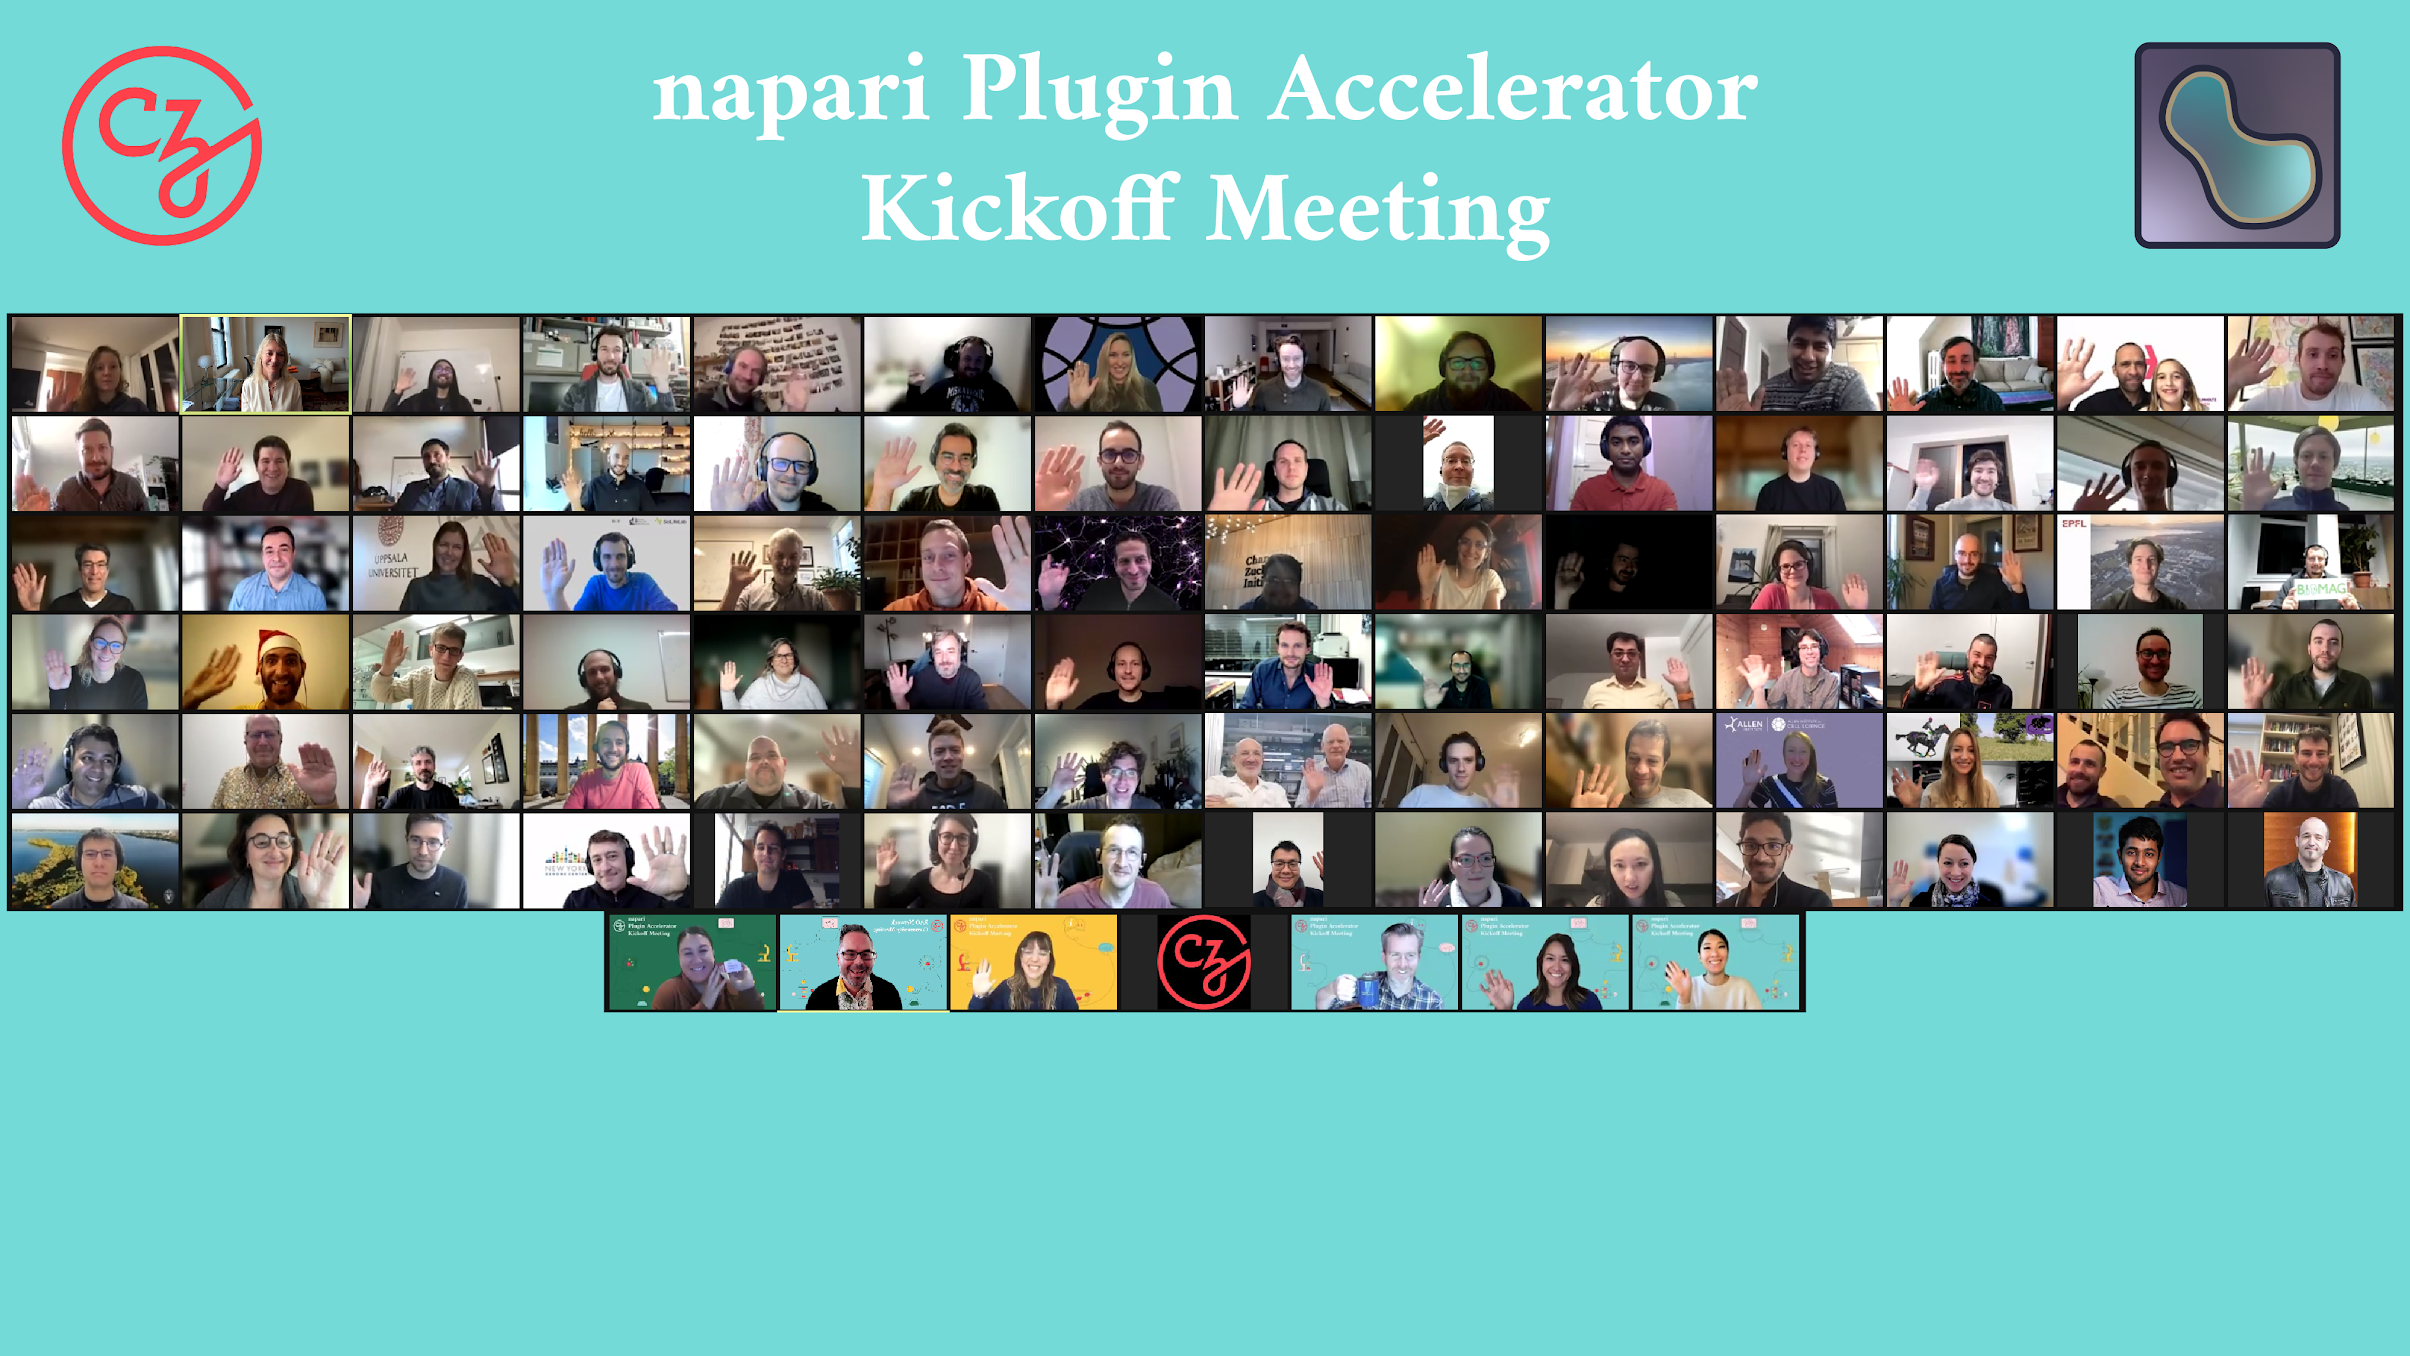 A group photo of participants waving on Zoom who attended CZI’s napari Plugin Accelerator Kickoff Meeting.